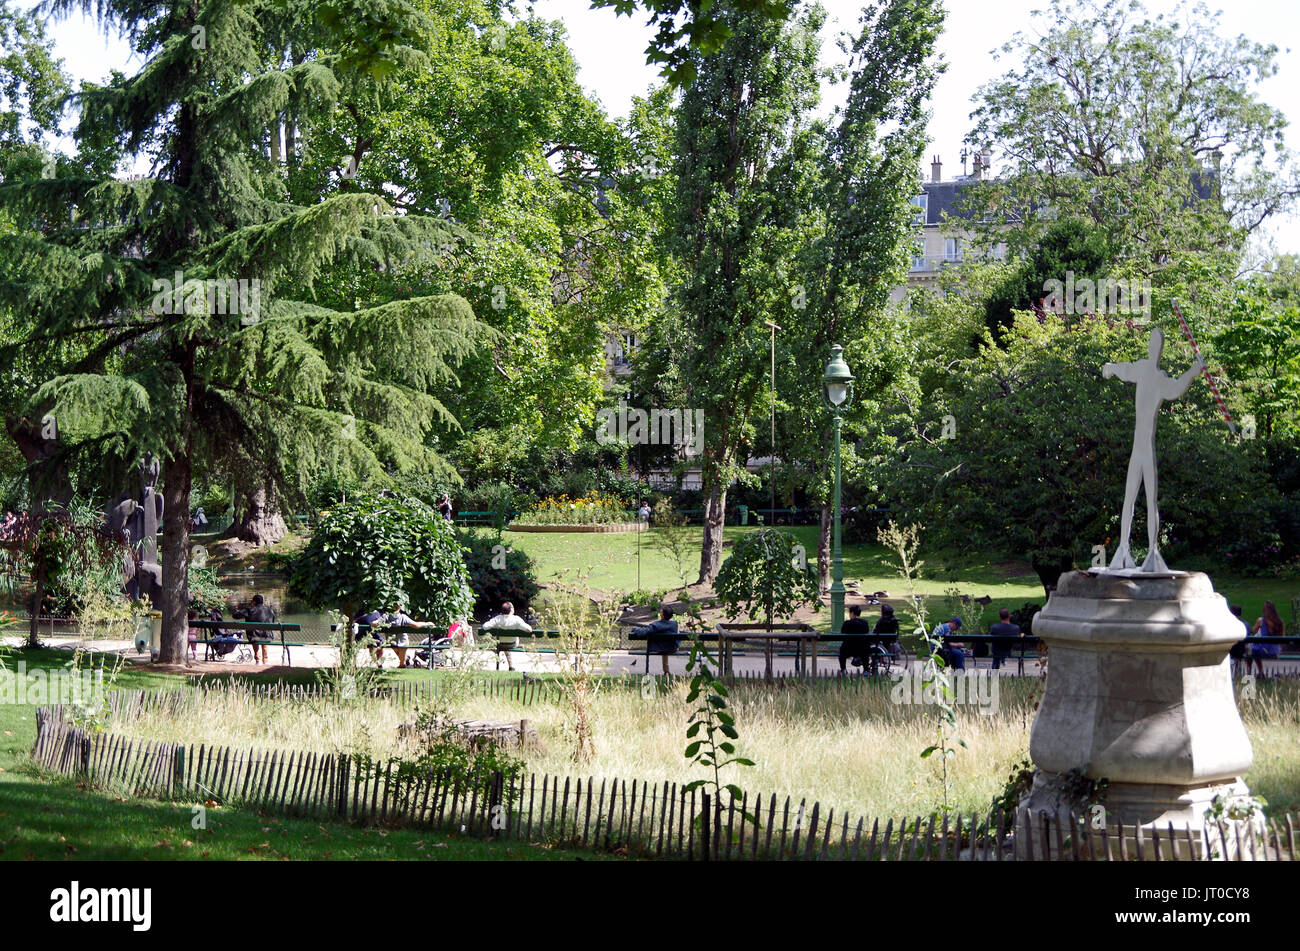 Square des Batignolles, Paris France, the landscaping, lawns, pond, lake and paths of this small but beautiful, Parisian neighborhood park, Stock Photo